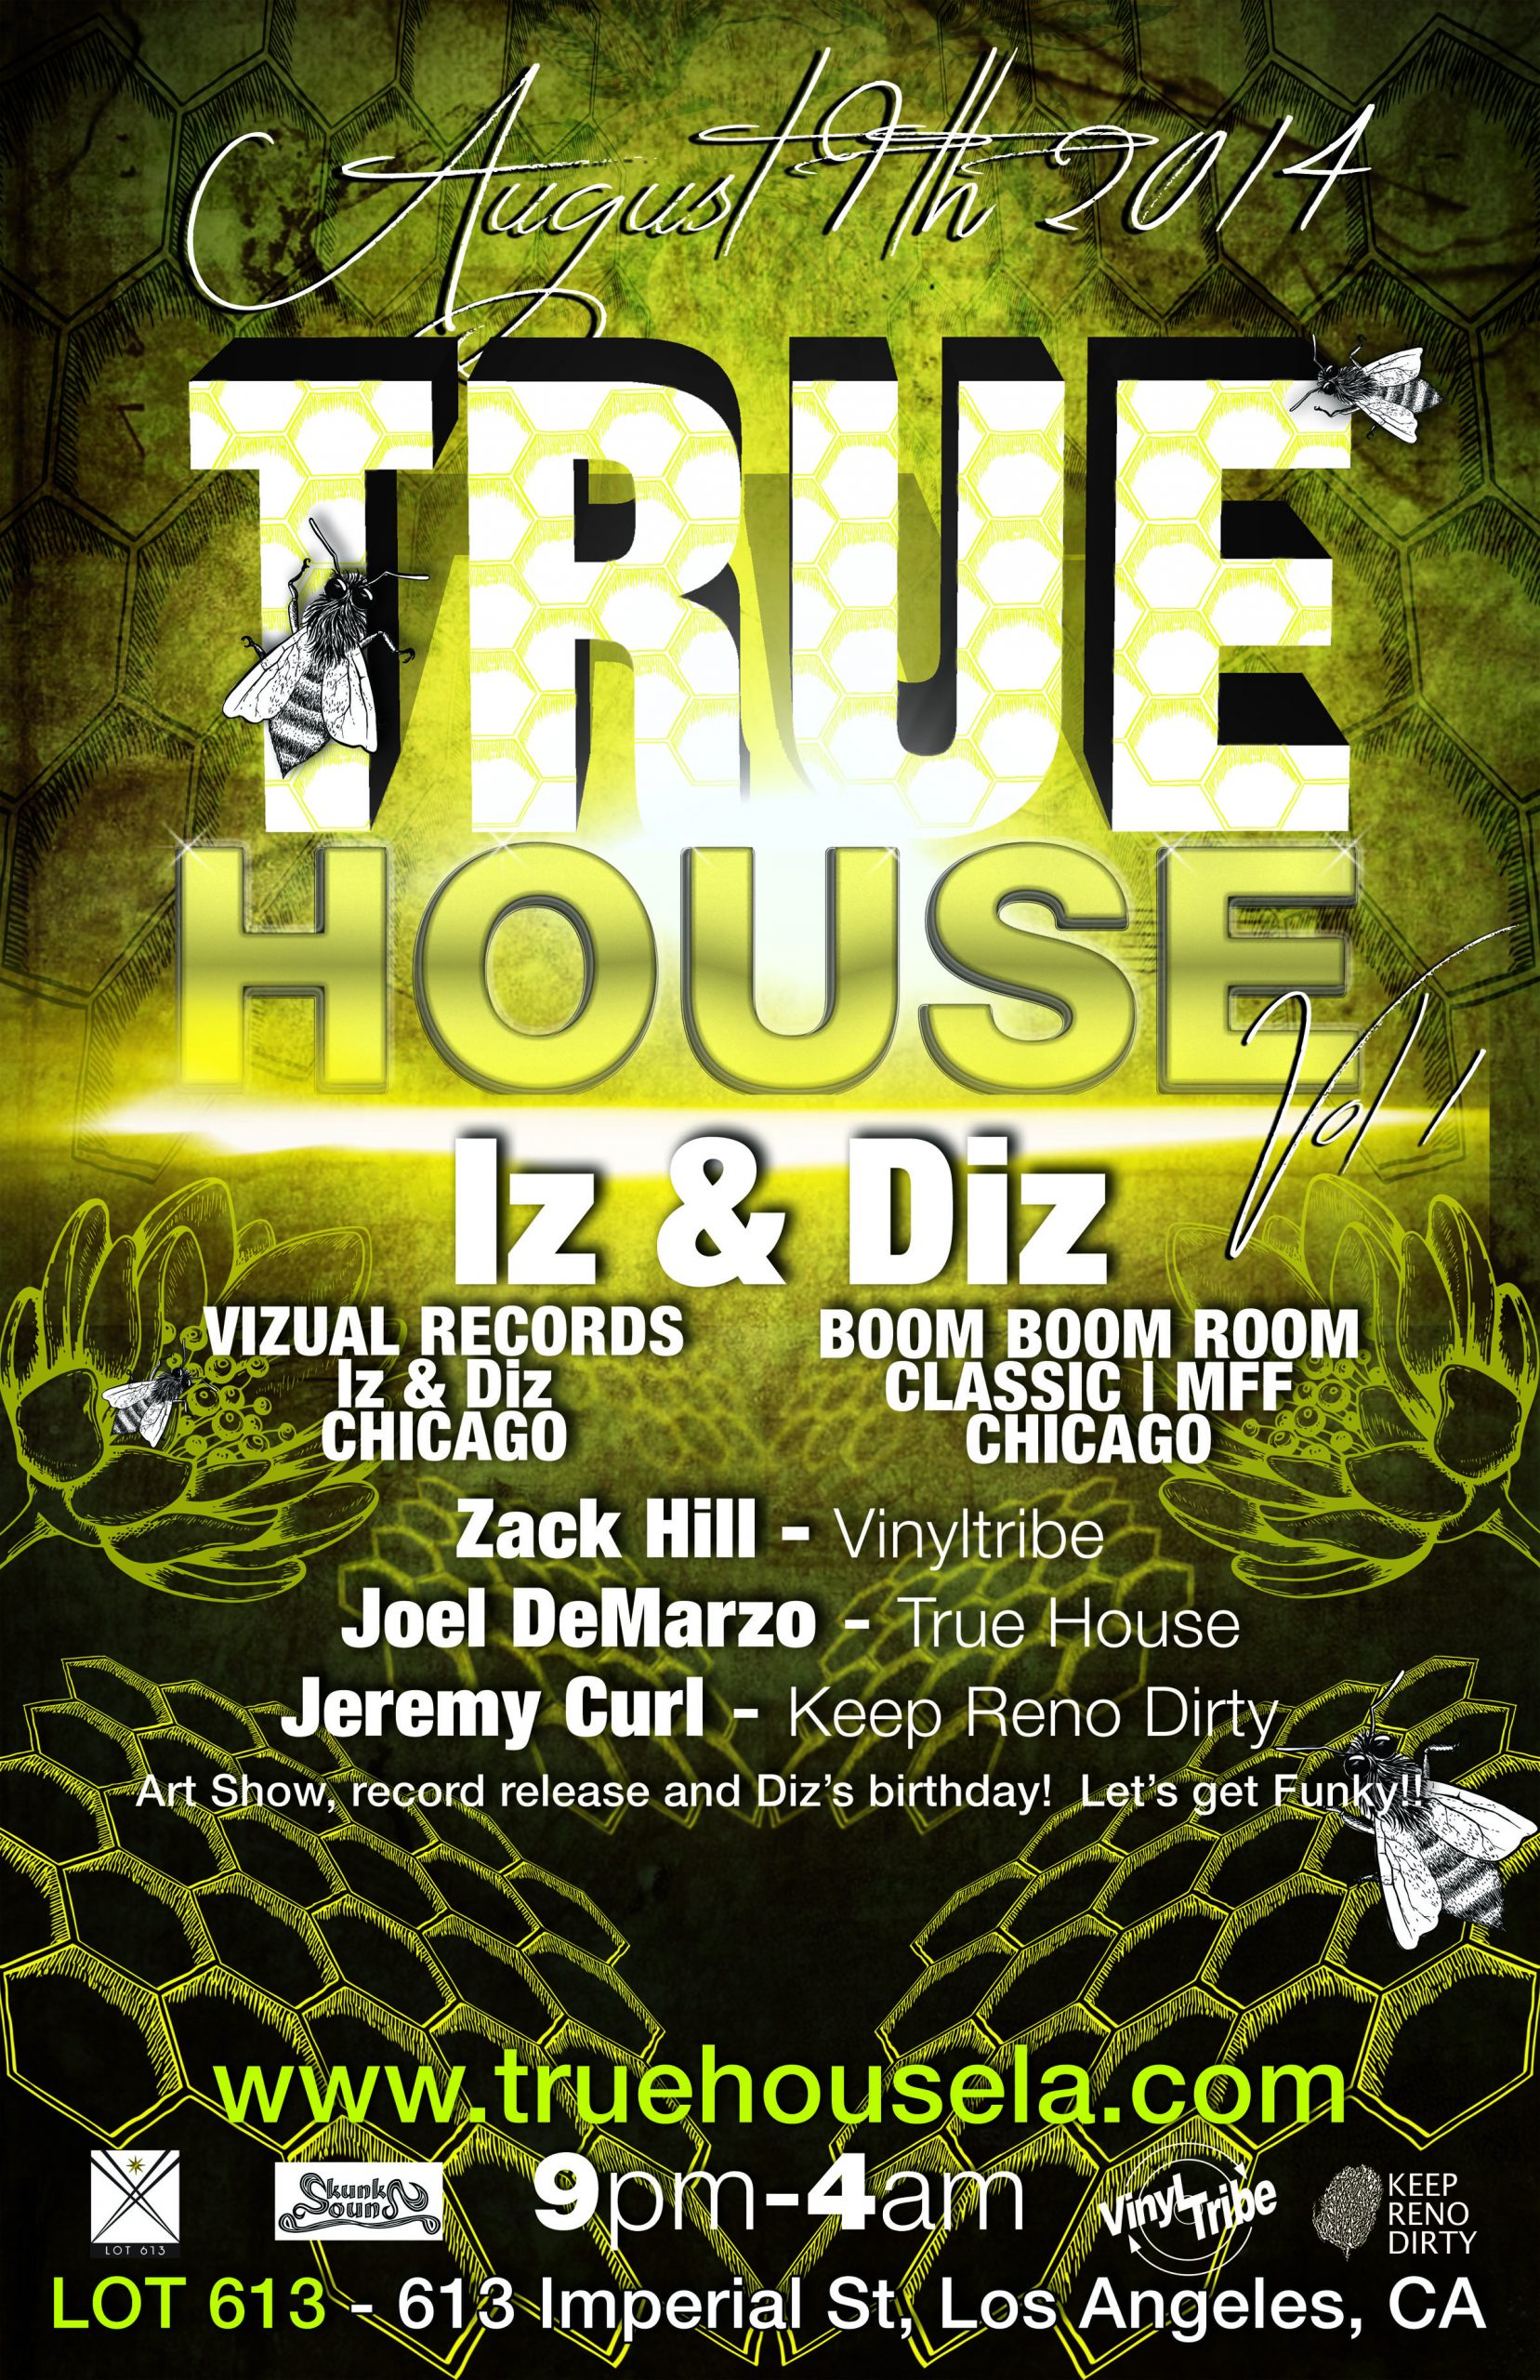 True House Poster (2)